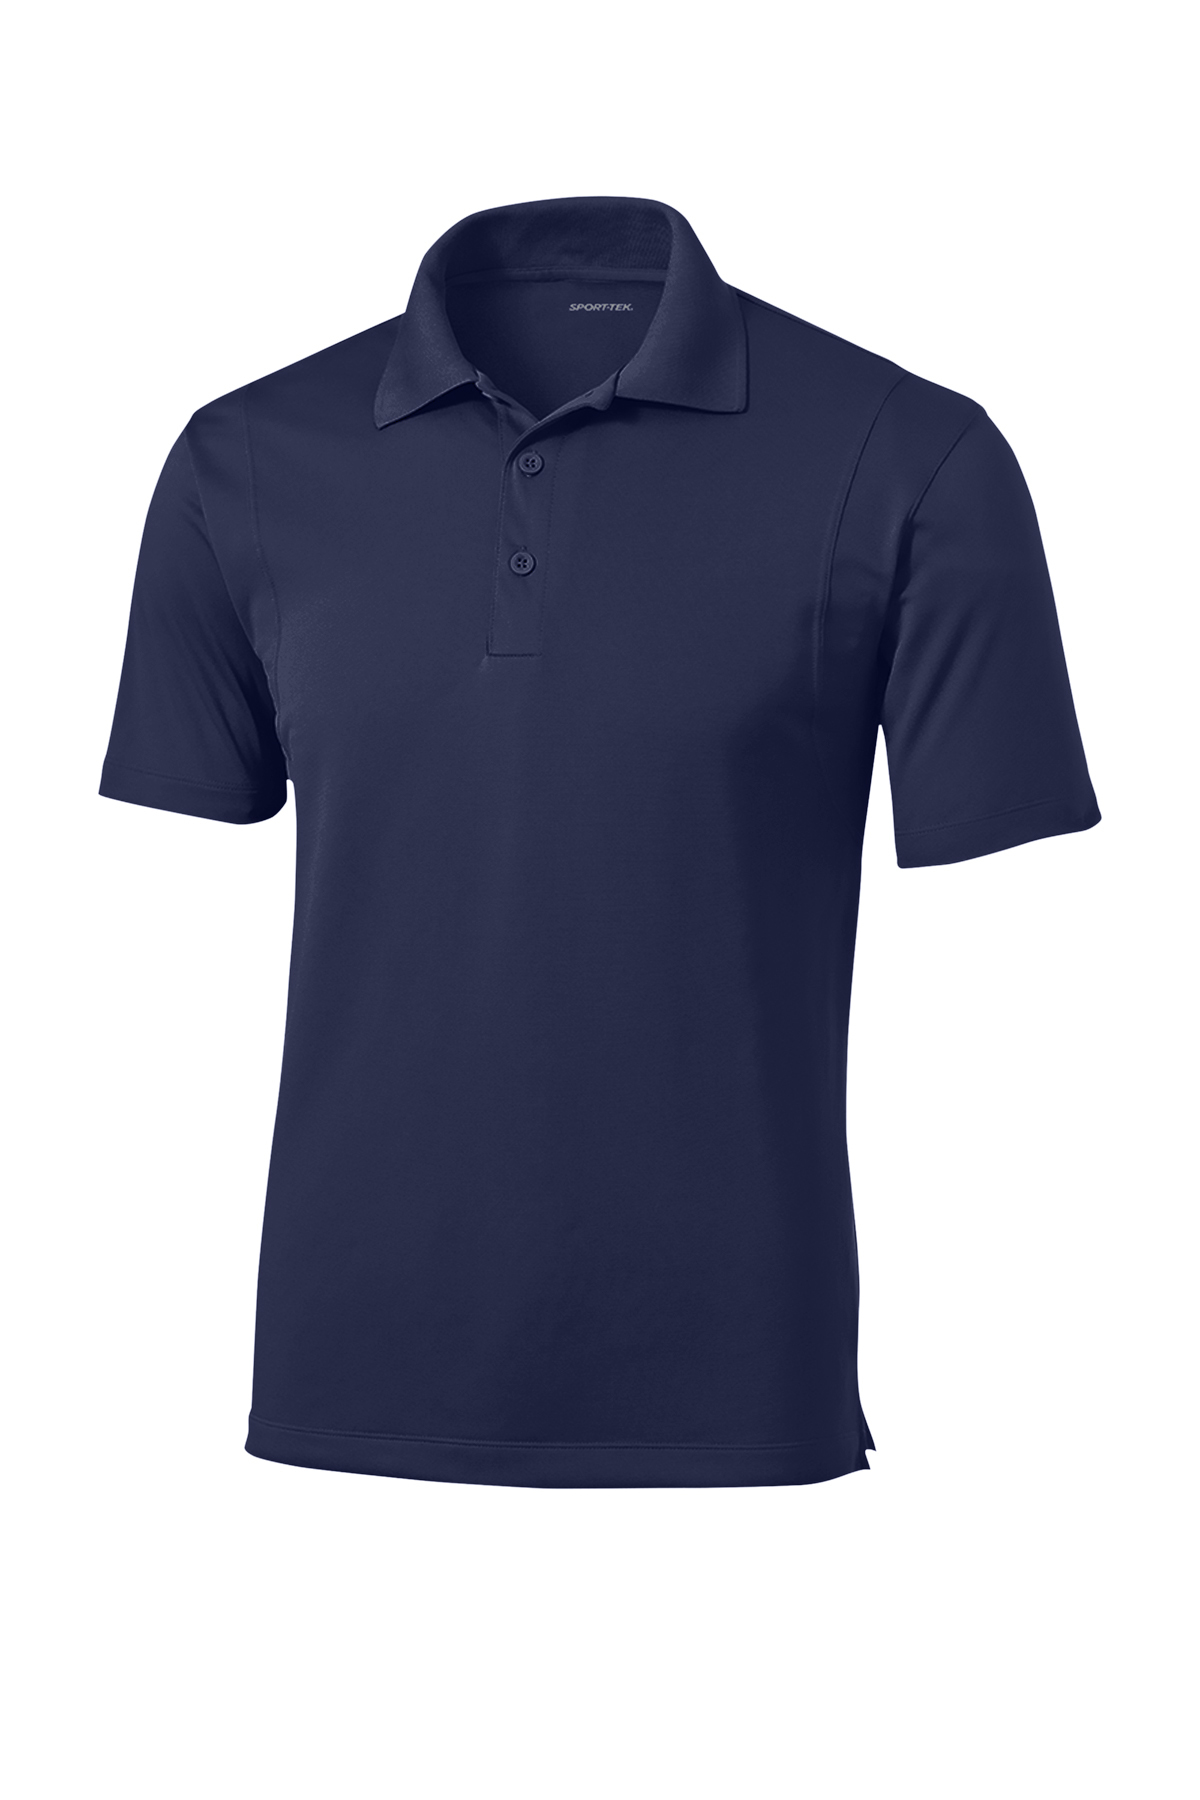 Sport-Tek and Port Authority Cotton Sport Shirts at Sport Shirt Outlet